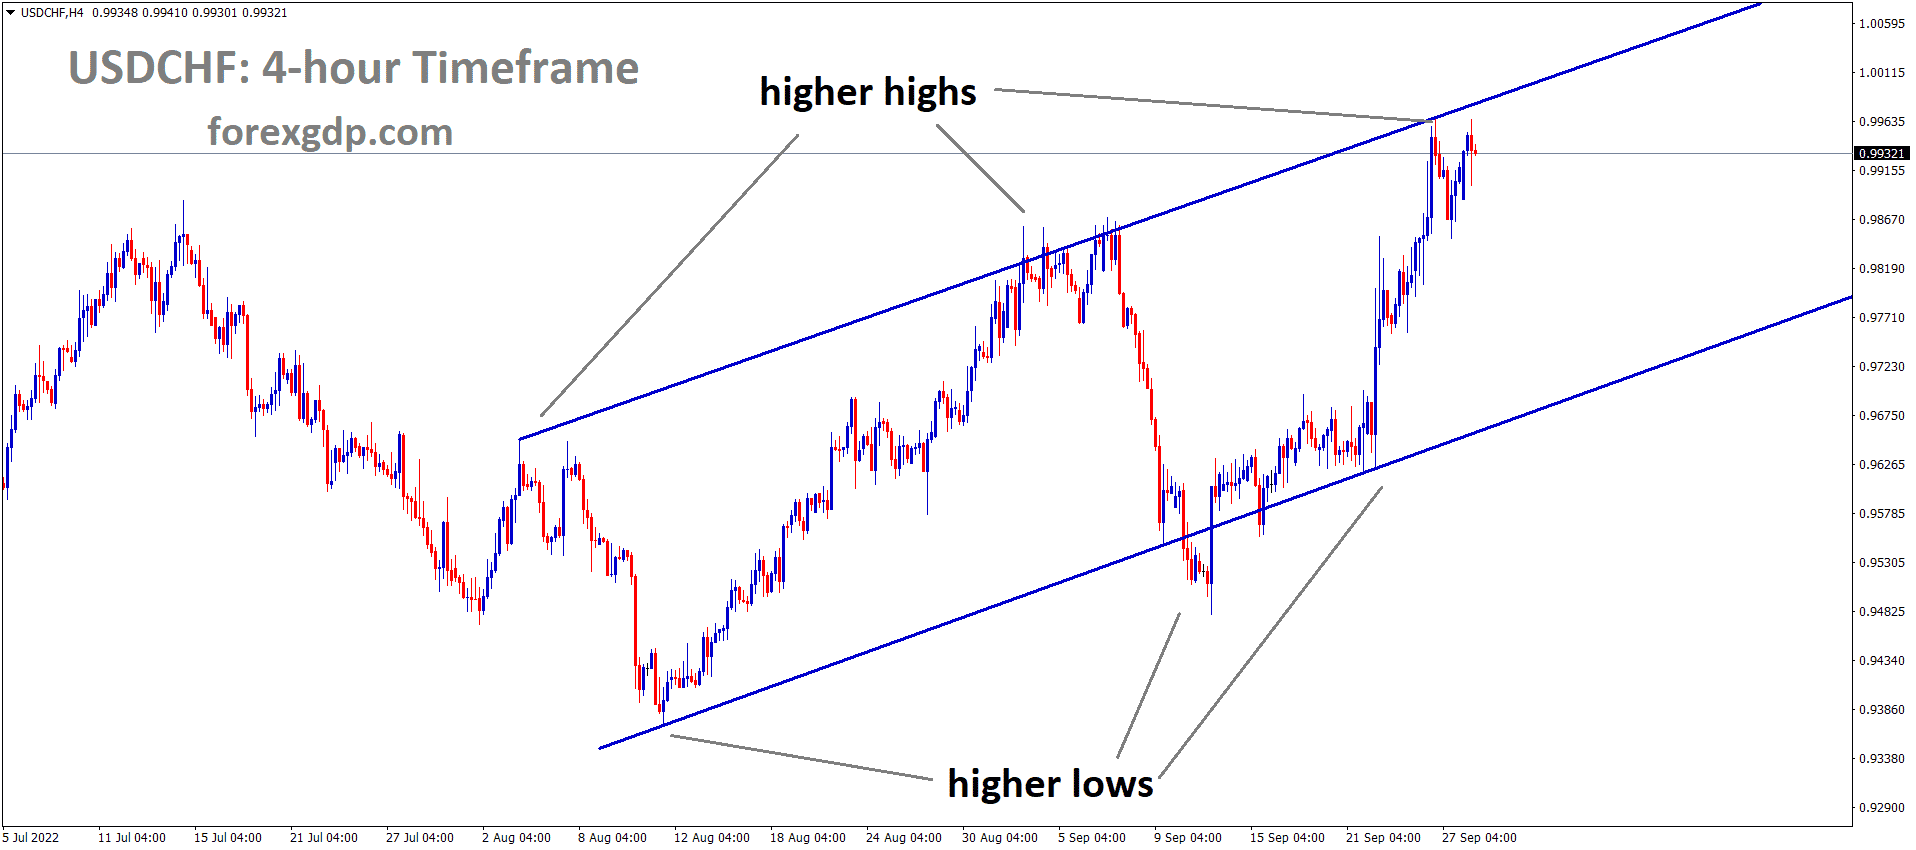 USDCHF is moving in an Ascending channel and the market has reached the higher high area of the channel.